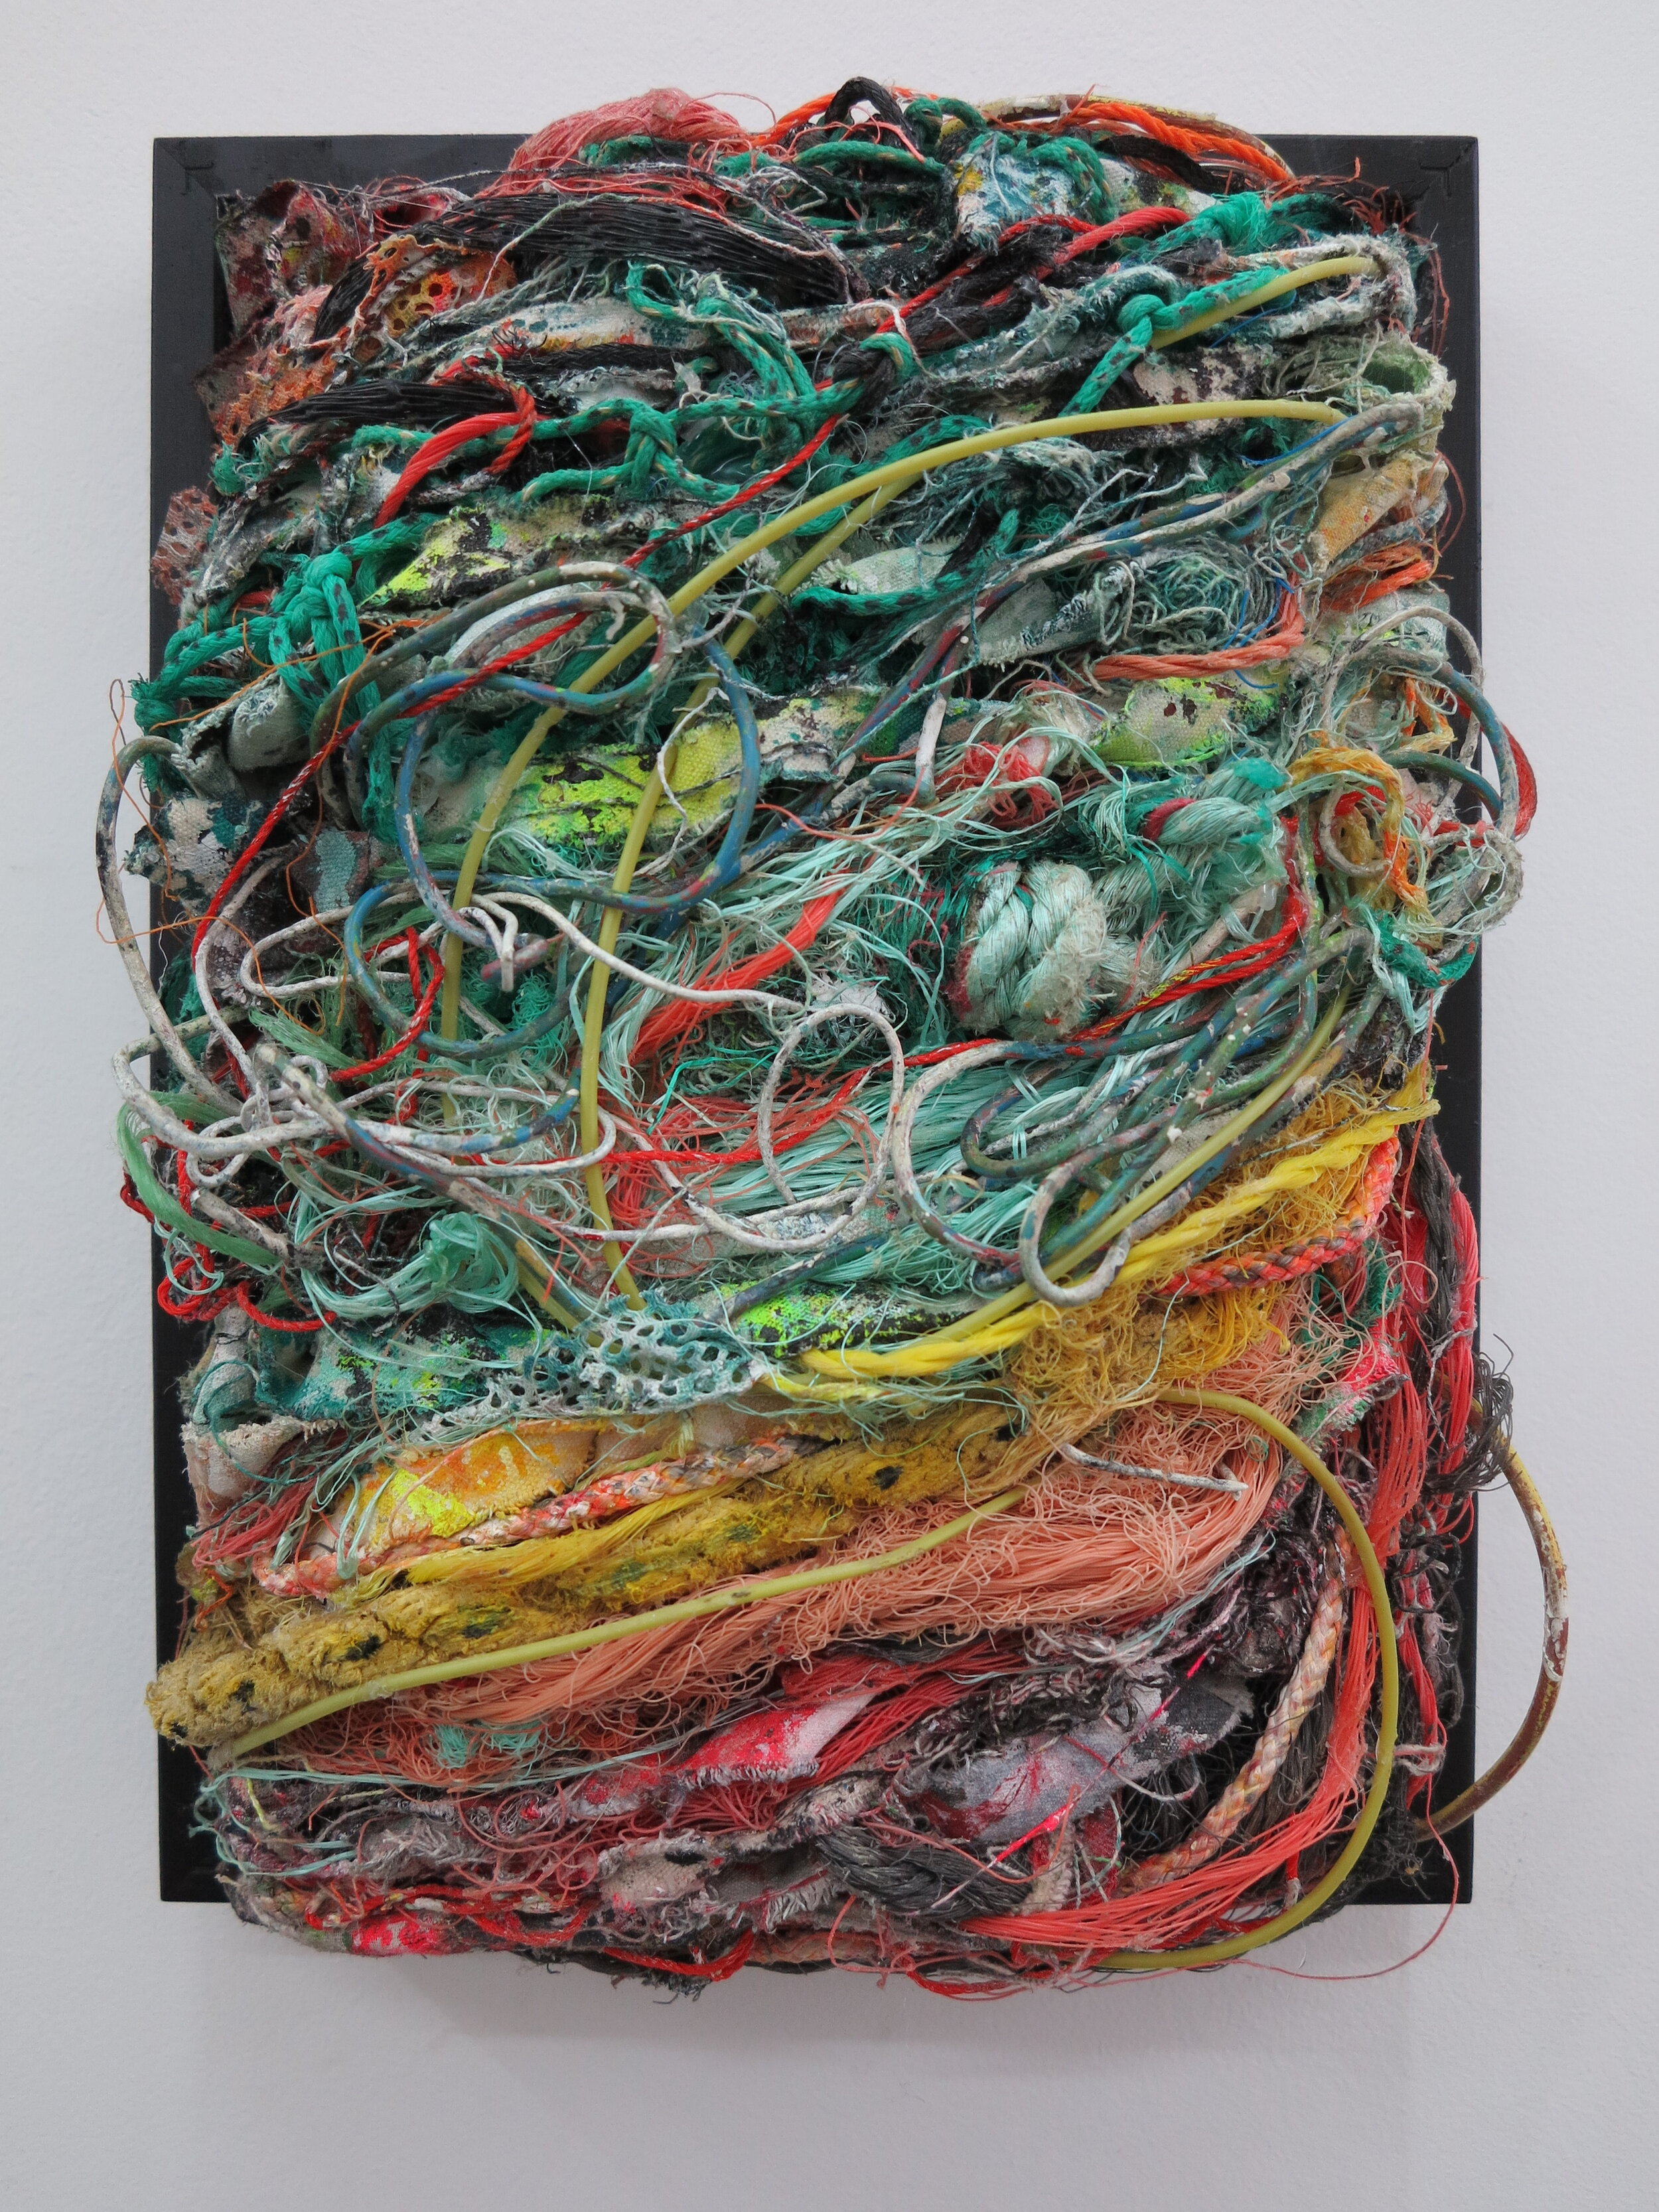   C Creature.   40 x 20 cm  Composite of recovered fishing nets &amp; ‘tagliatelle’ trimmings in a wooden frame.   Private collection 2020.  